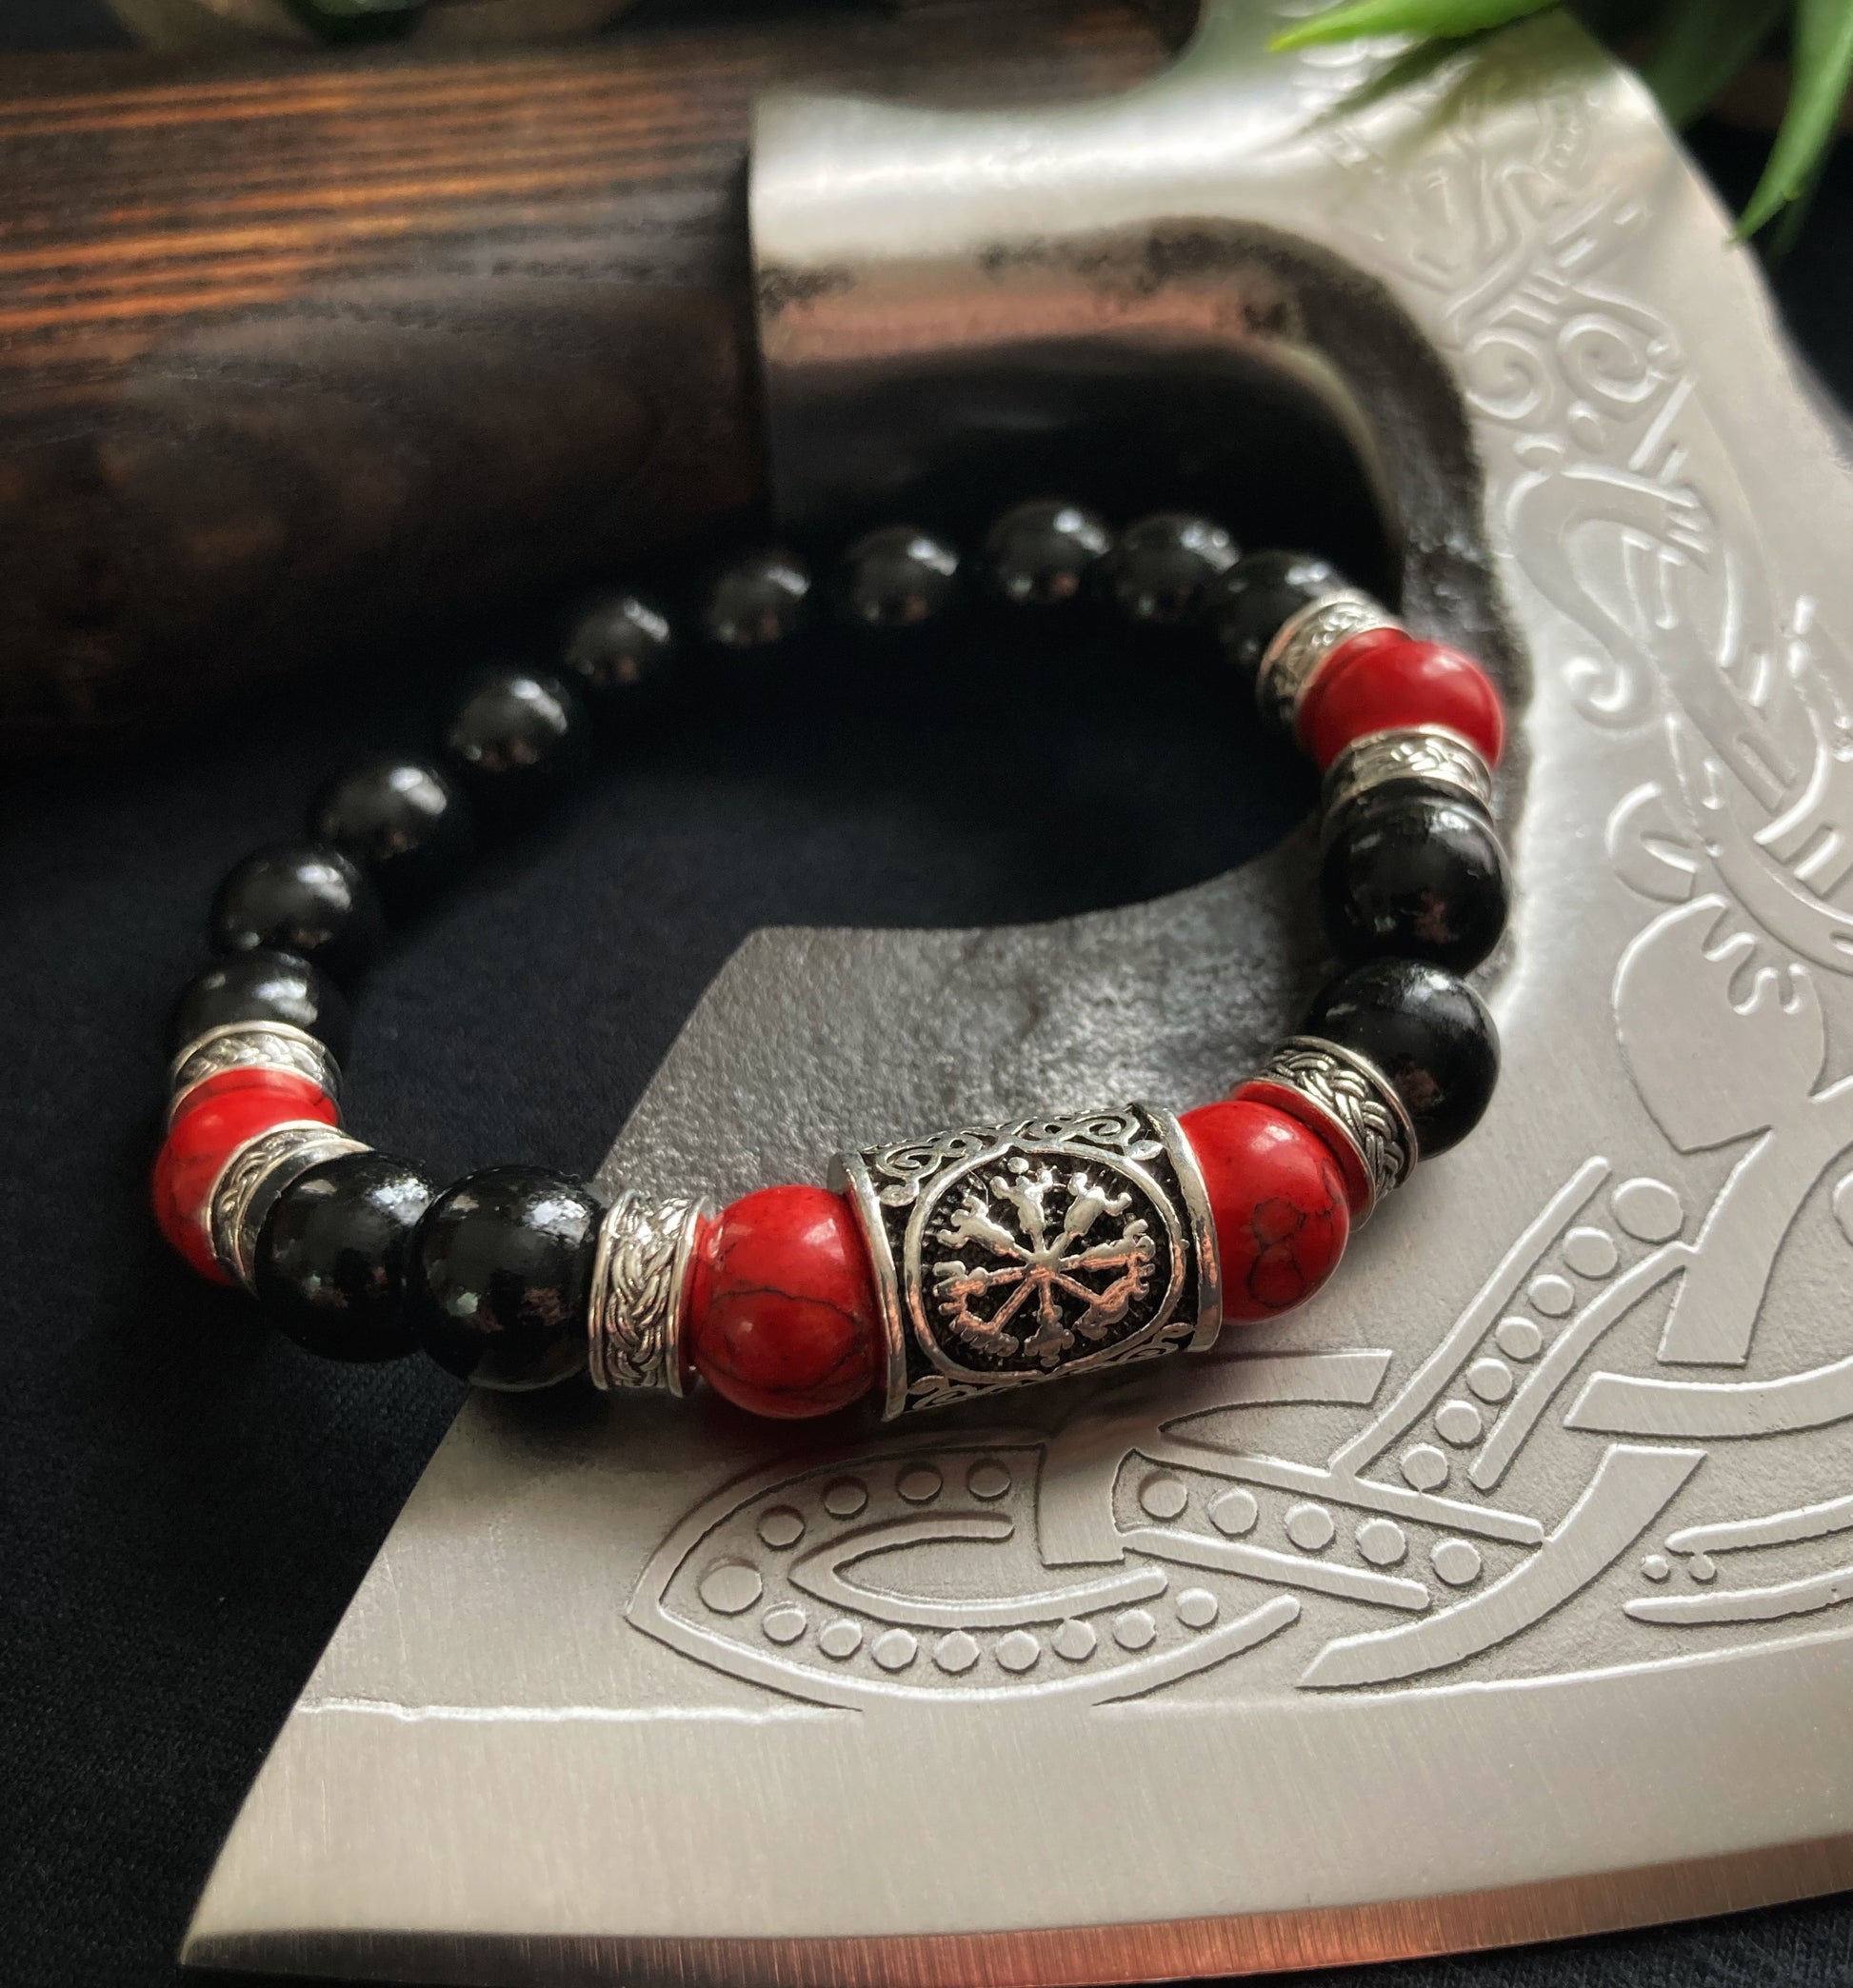 Draped over an axe blade lies a beautiful beaded bracelet. There are black wooden beads and red with turquoise running through them as well as narrow silver coloured patterned metal pieces. The main fetaure is a metal rune with an engraving.